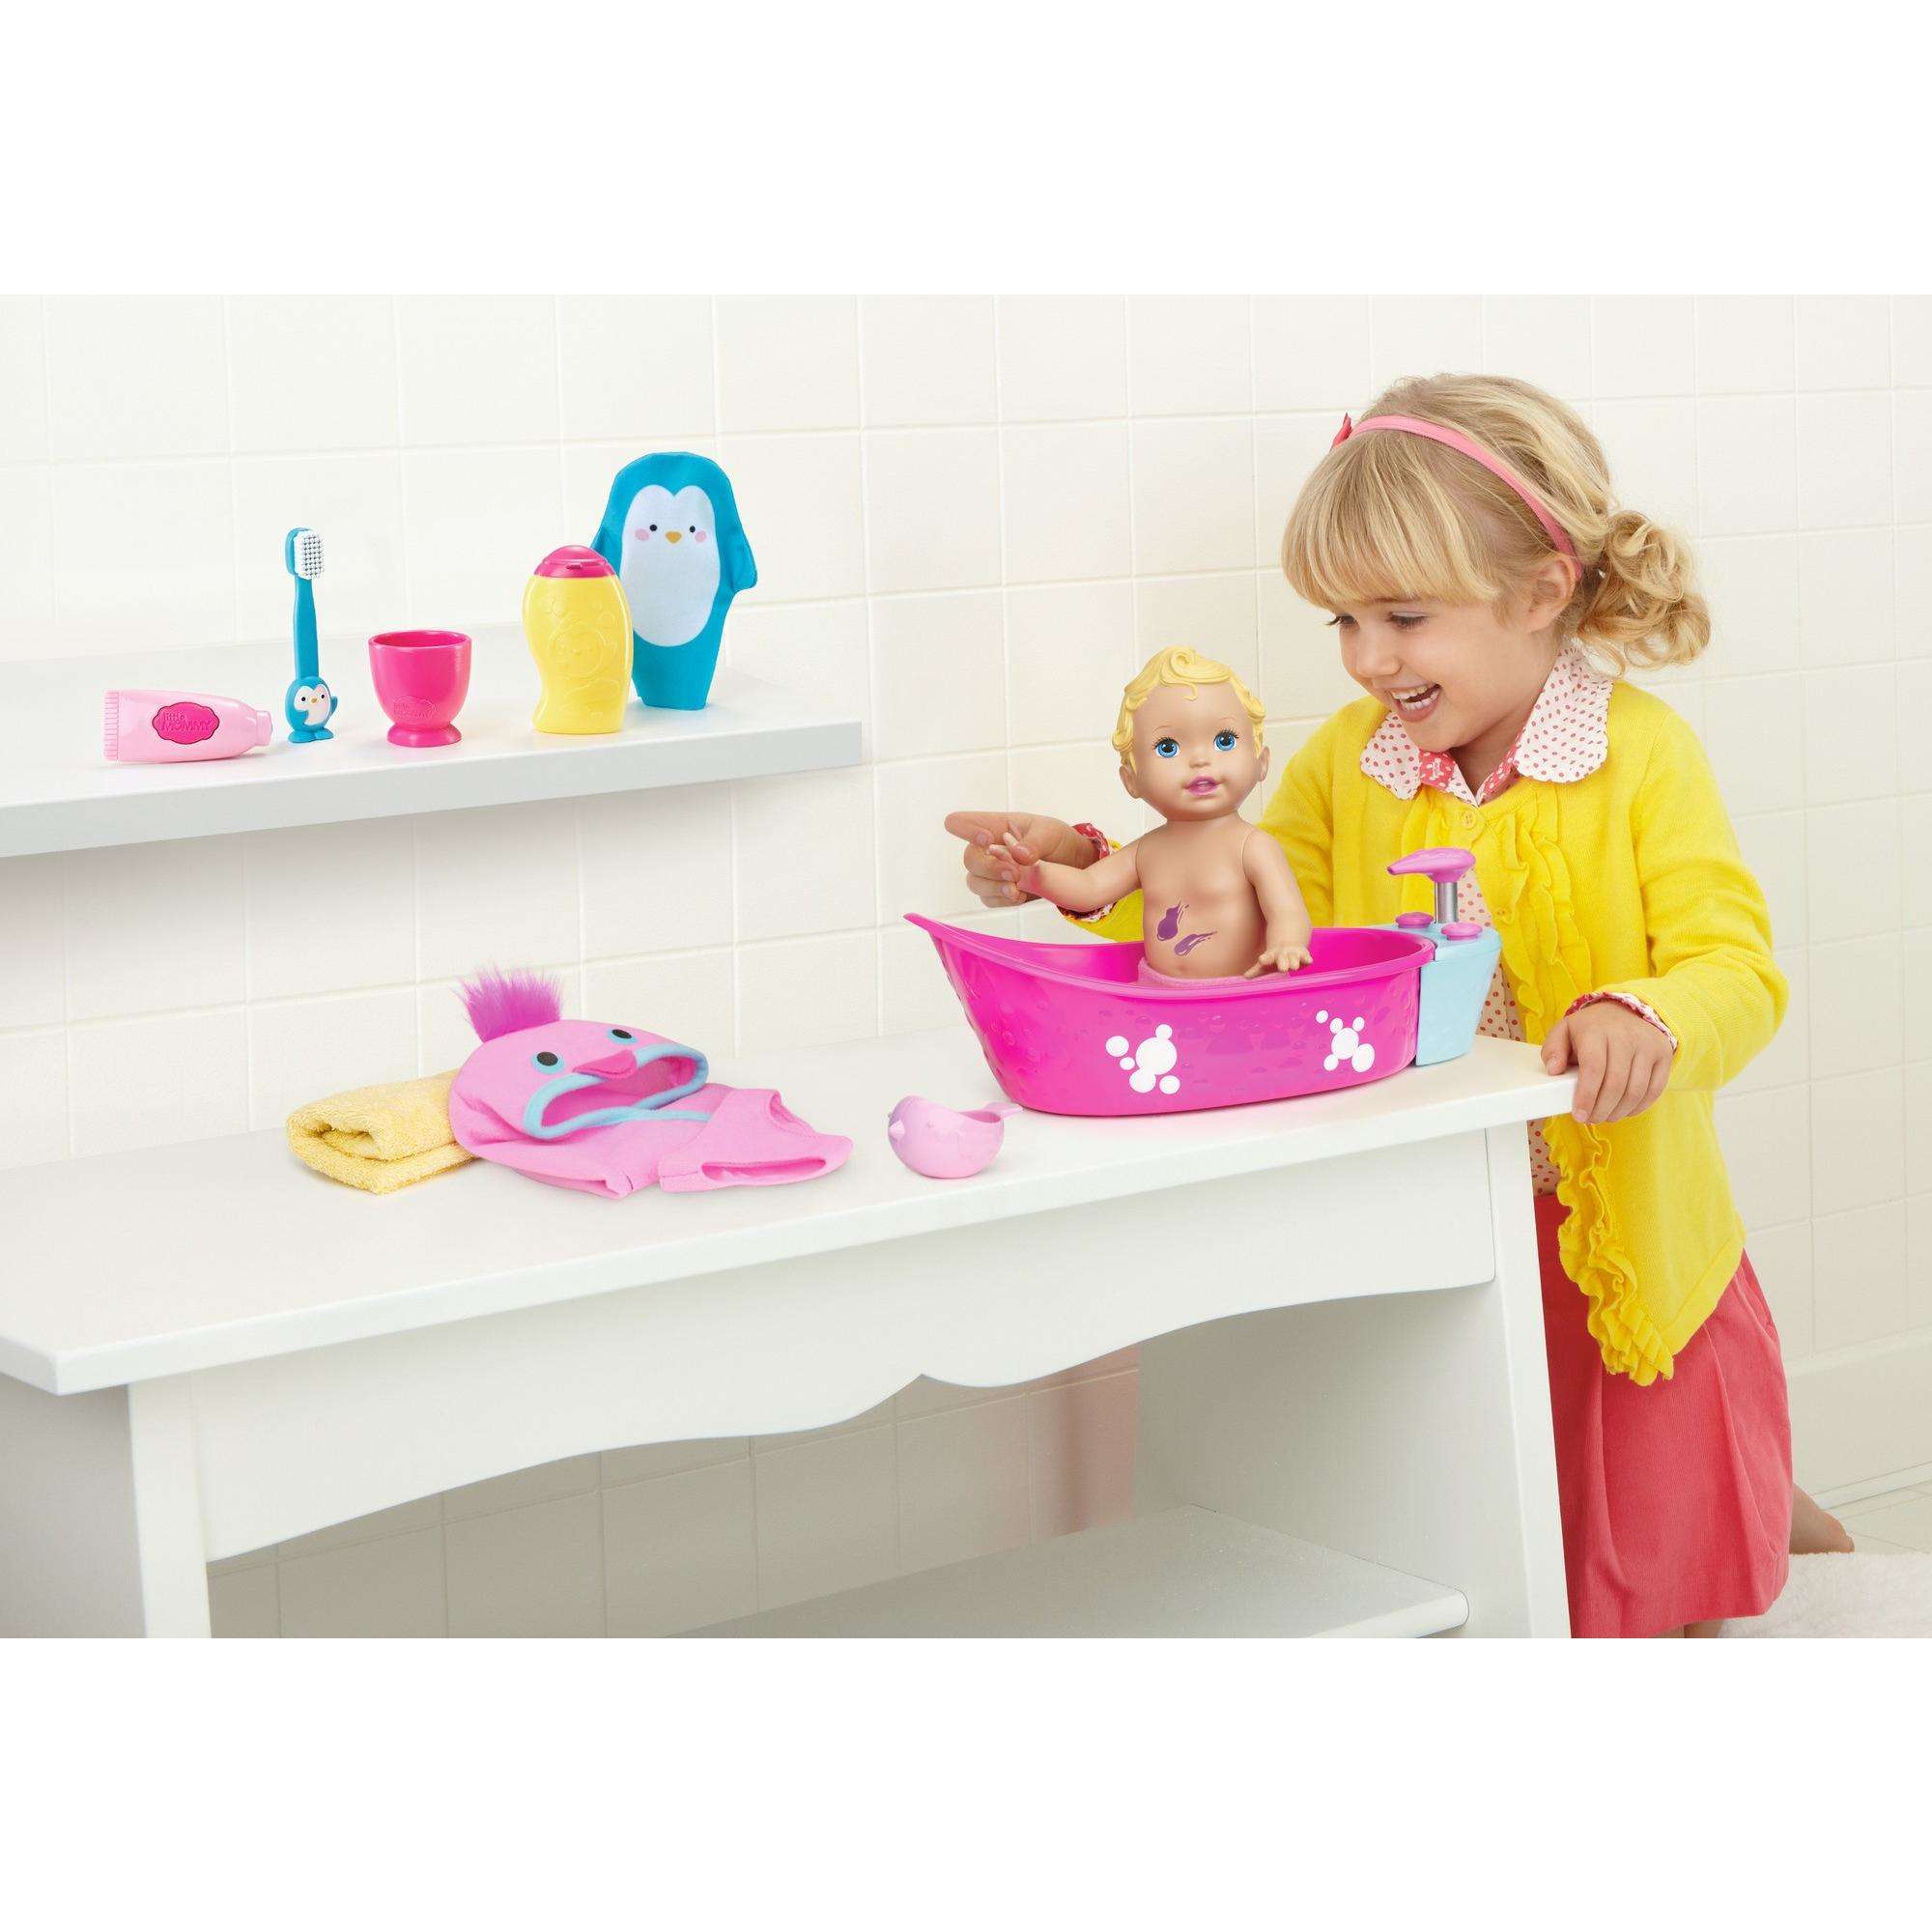 Little Mommy Bubbly Bathtime Deluxe Baby Doll Playset - image 2 of 8